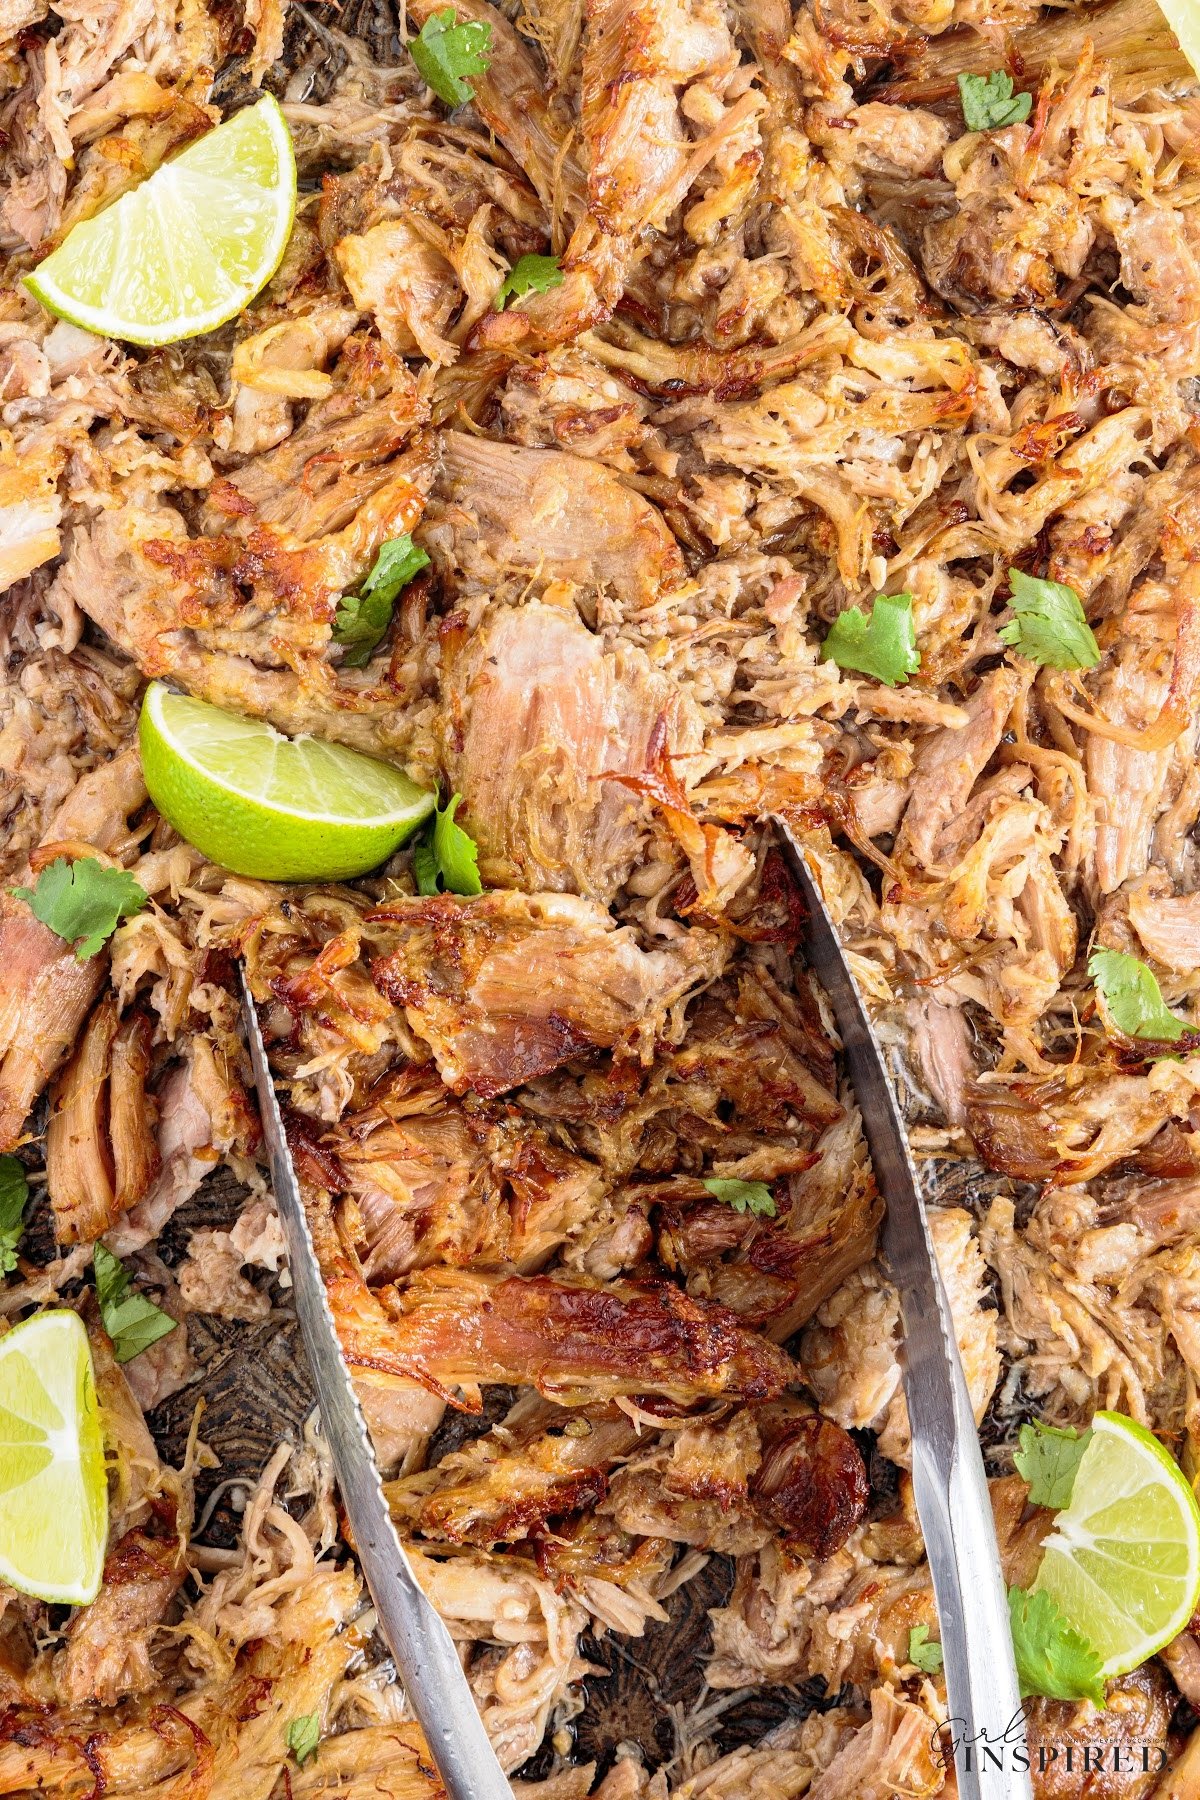 Mojo Pork shredded and ready to eat, garnished with lime,